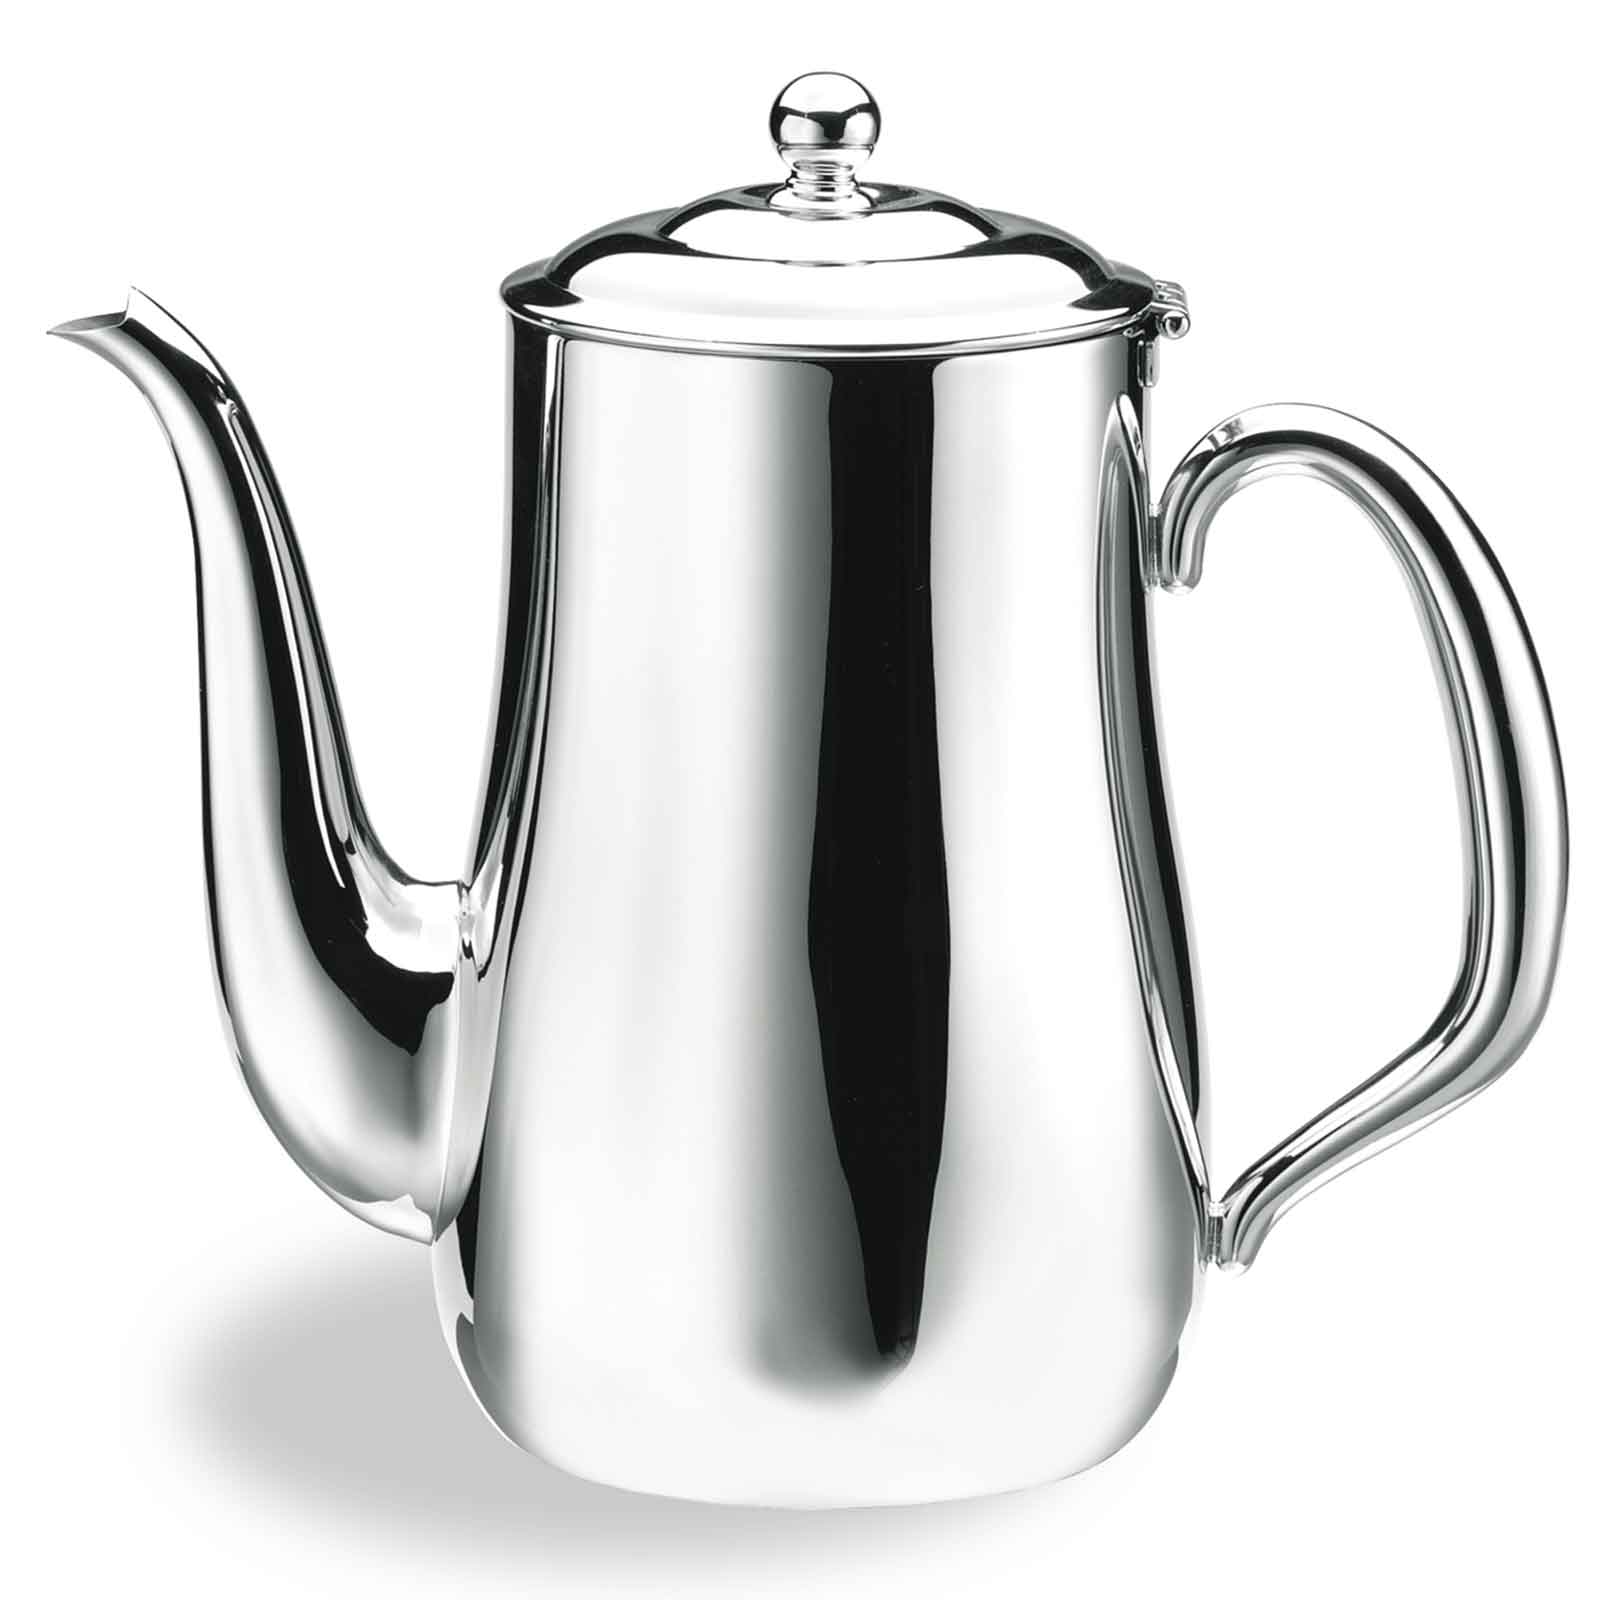 Walco Stainless CX513 Coffee Pot/Teapot, Stainless Steel, Holloware